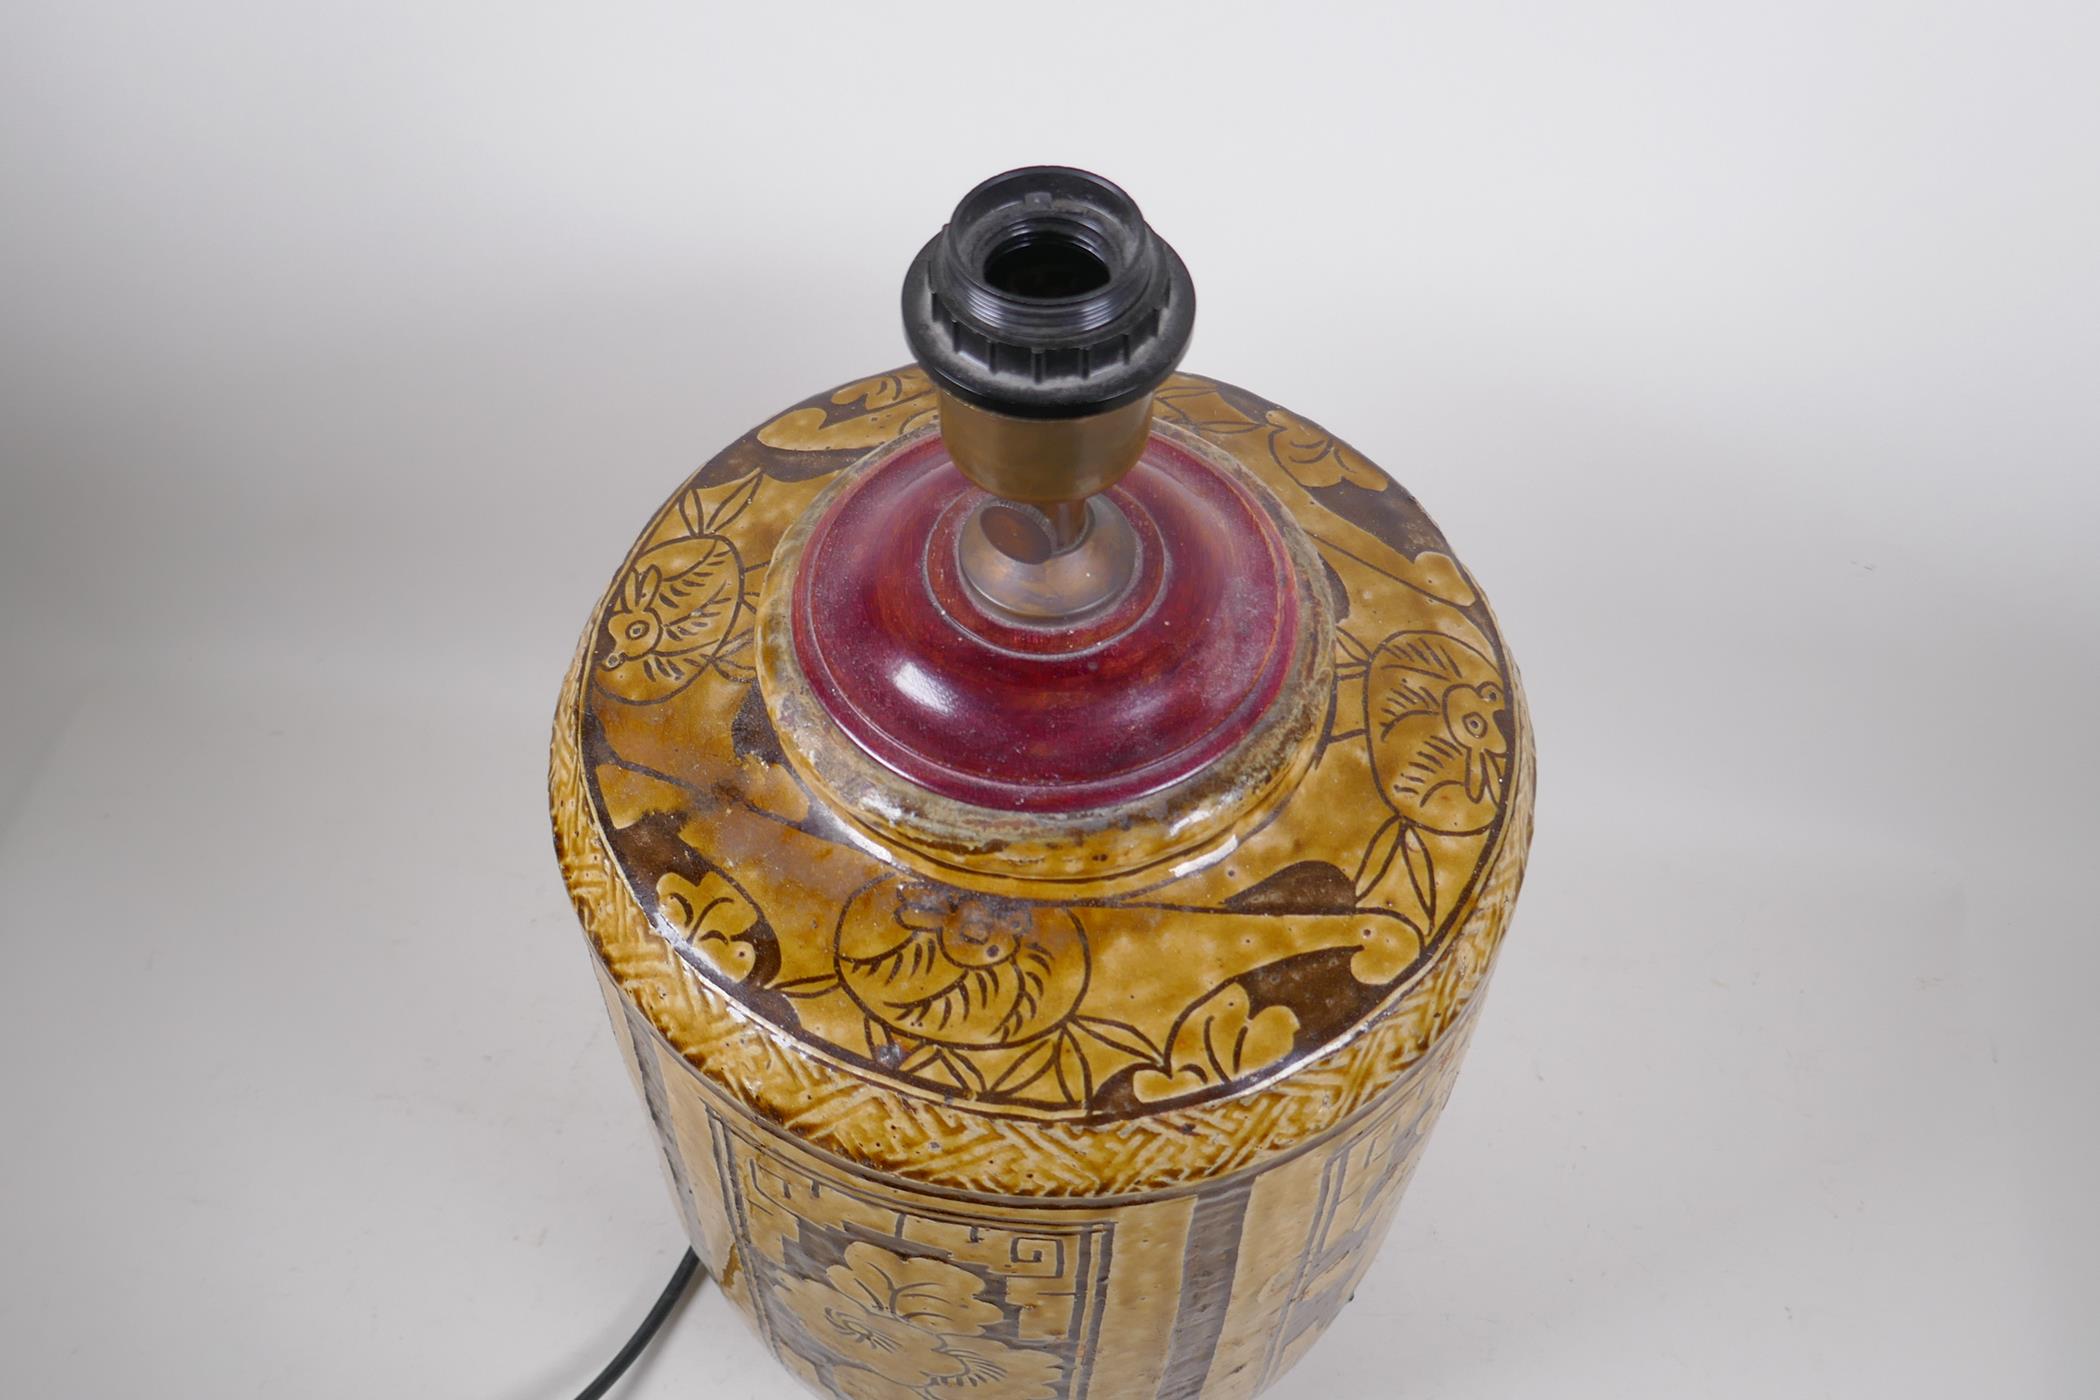 A C19th Chinese Cizhou kiln pottery jar, with decorative floral panels and bats, converted to a - Image 4 of 5